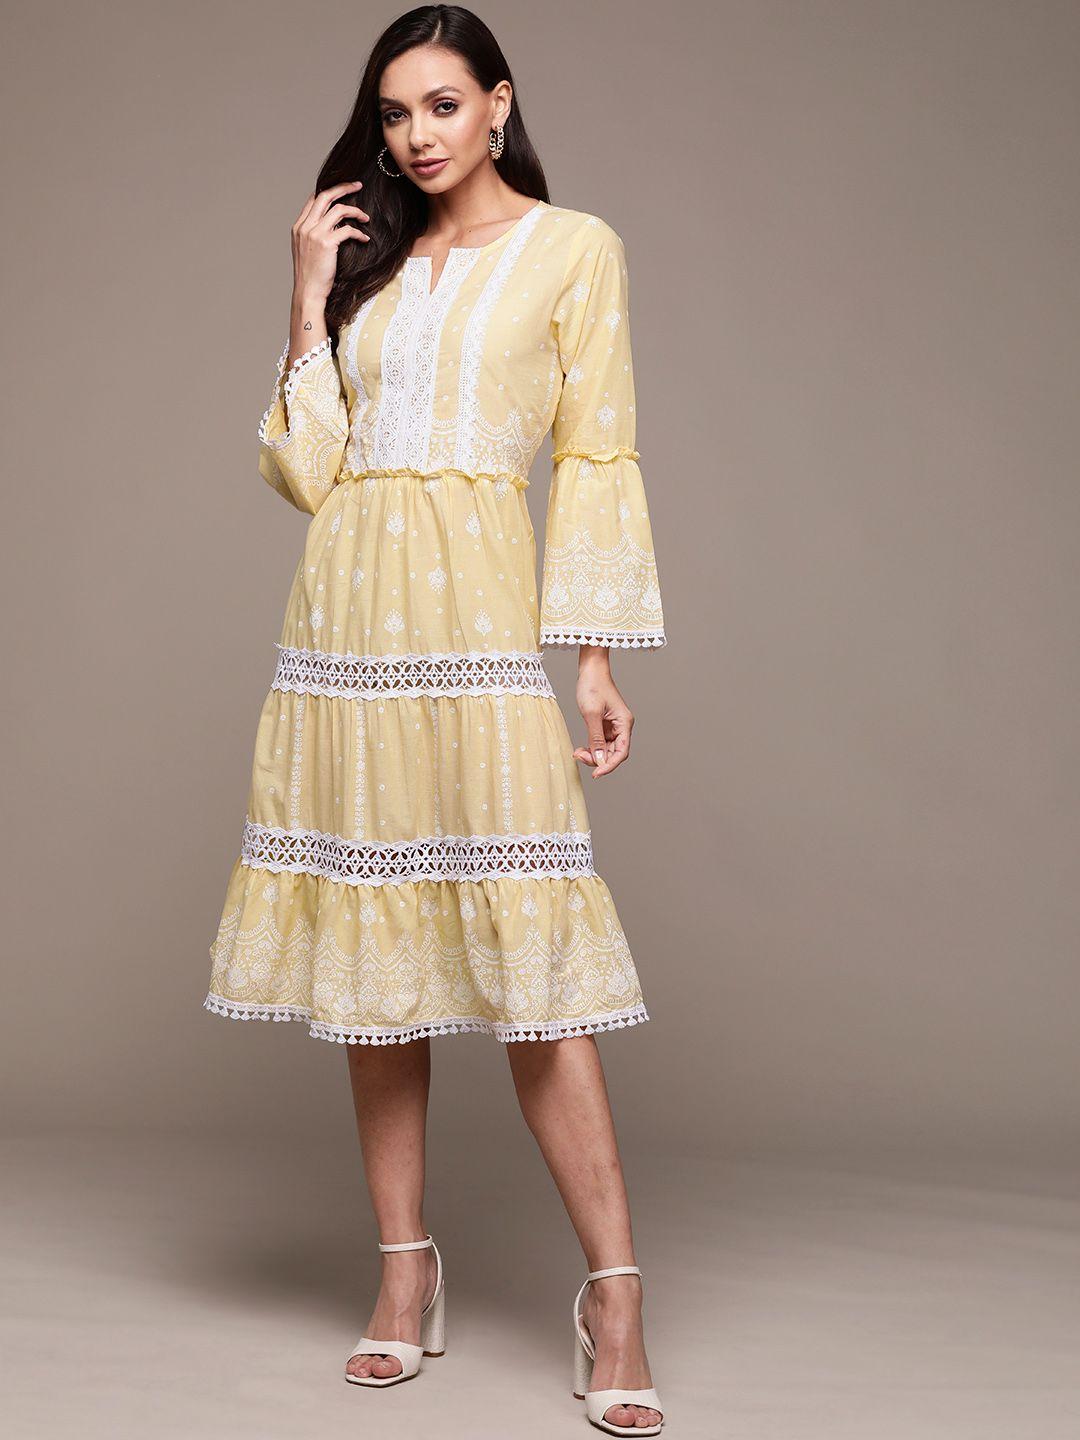 ishin-yellow-&-white-floral-embroidered-a-line-dress